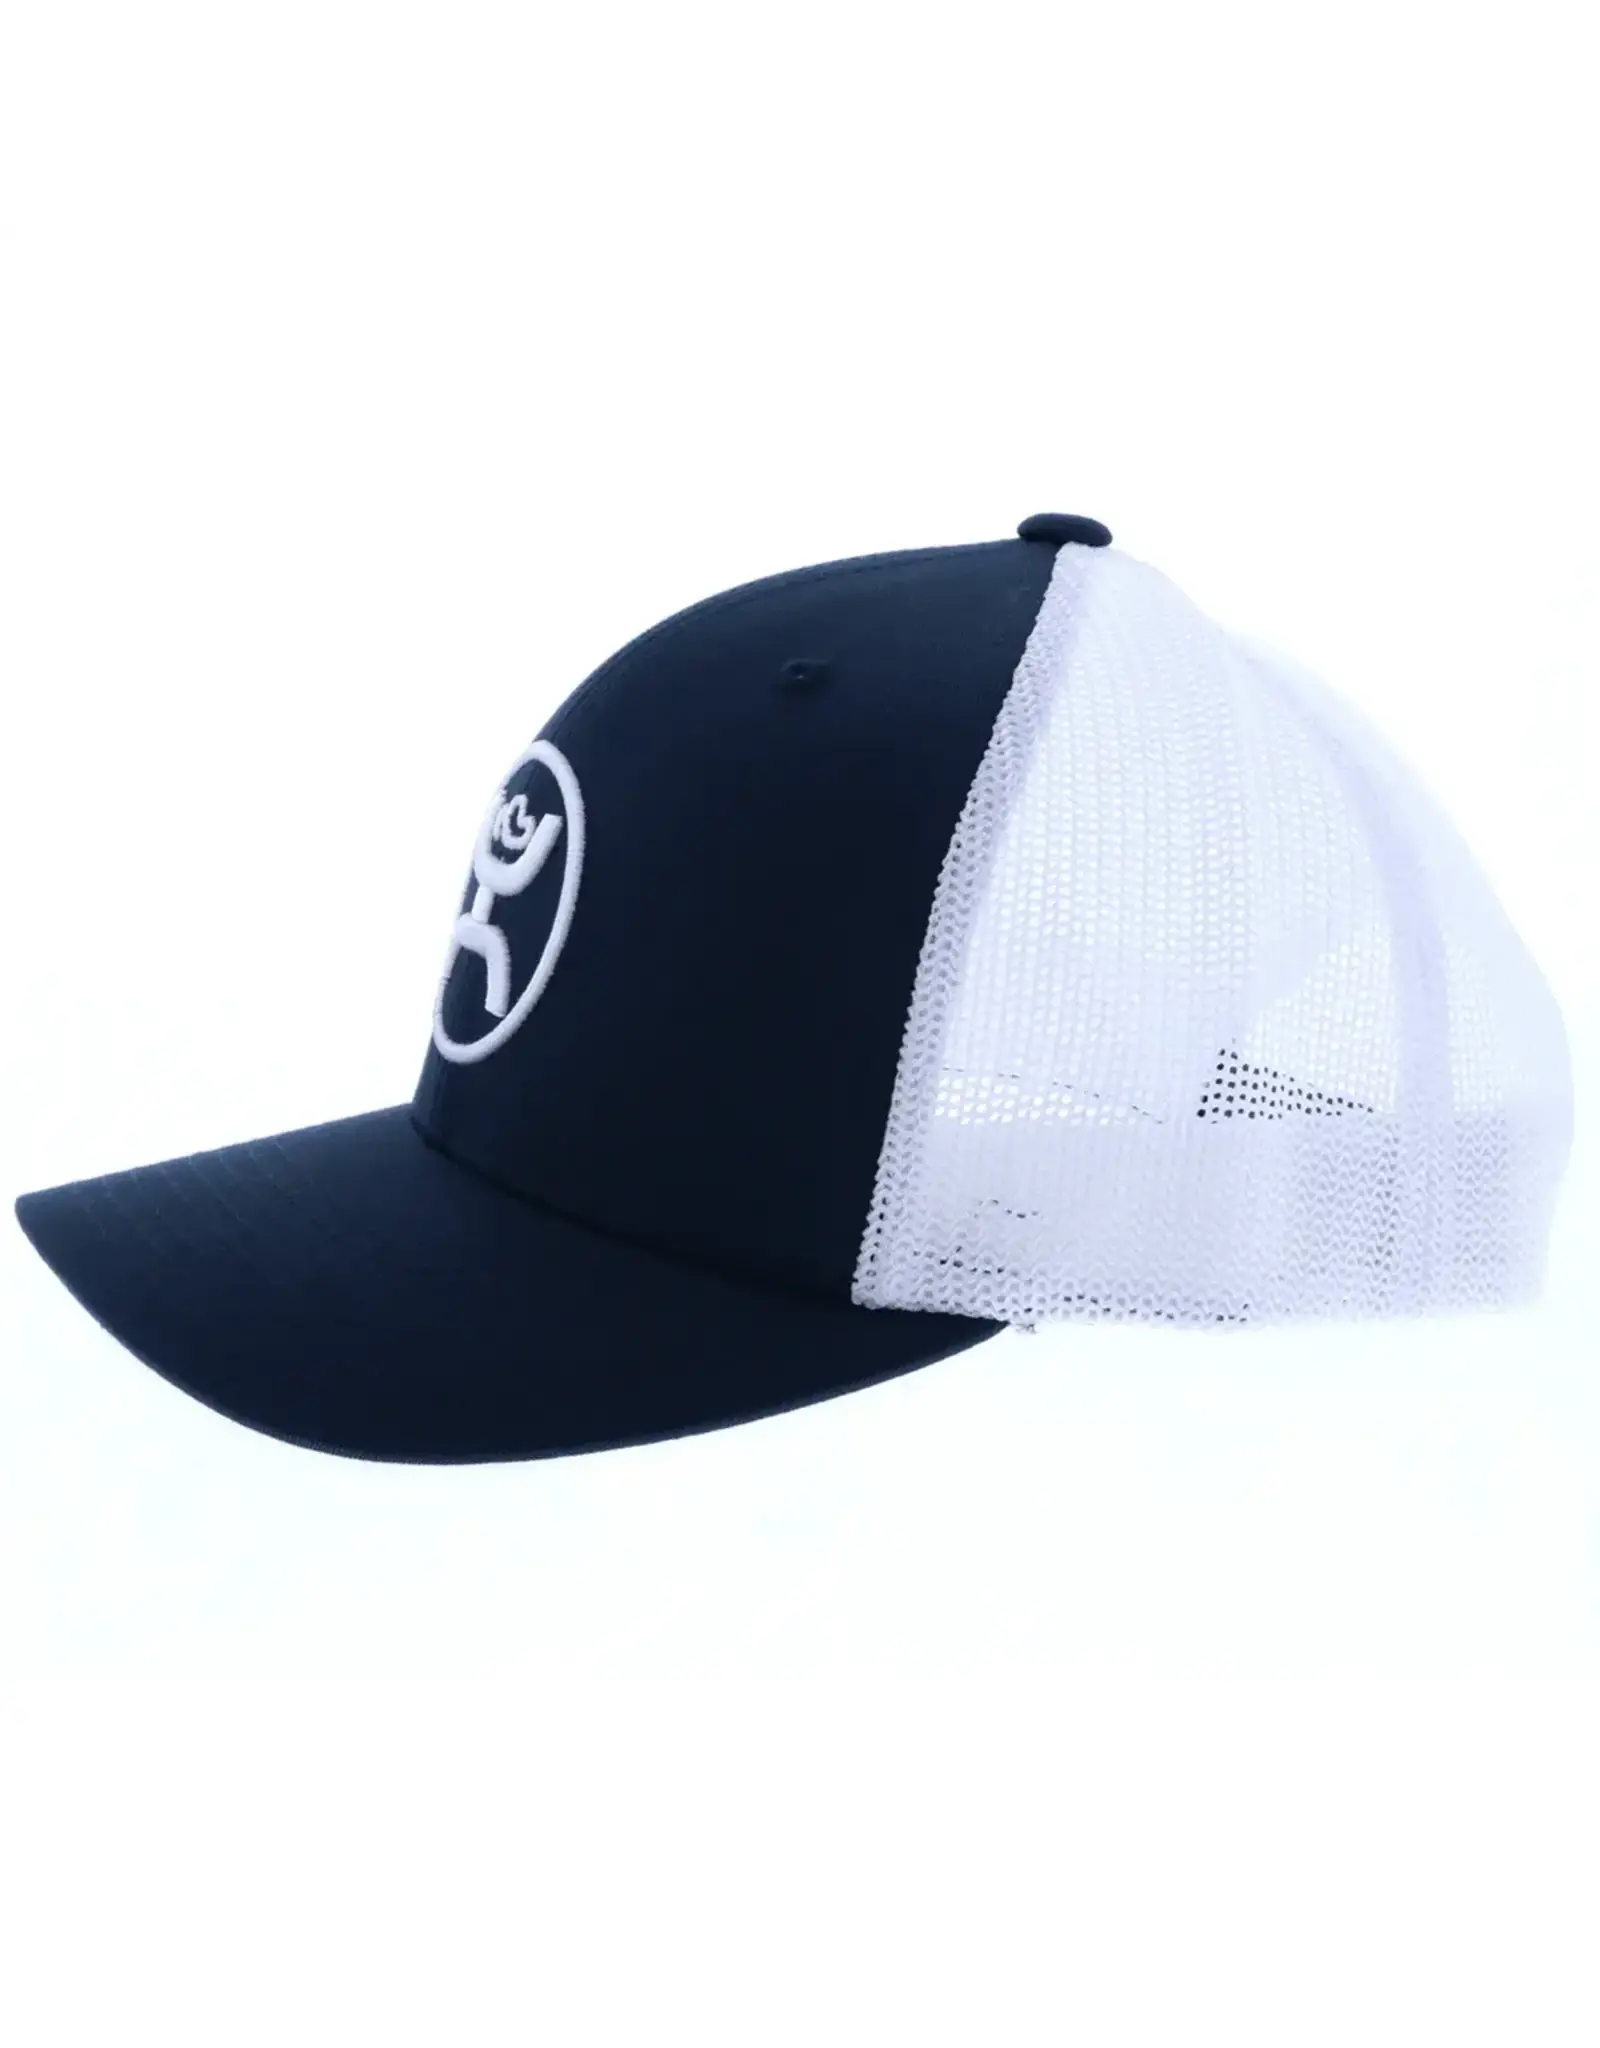 Hooey Brands Hat "O Classic" Navy & White